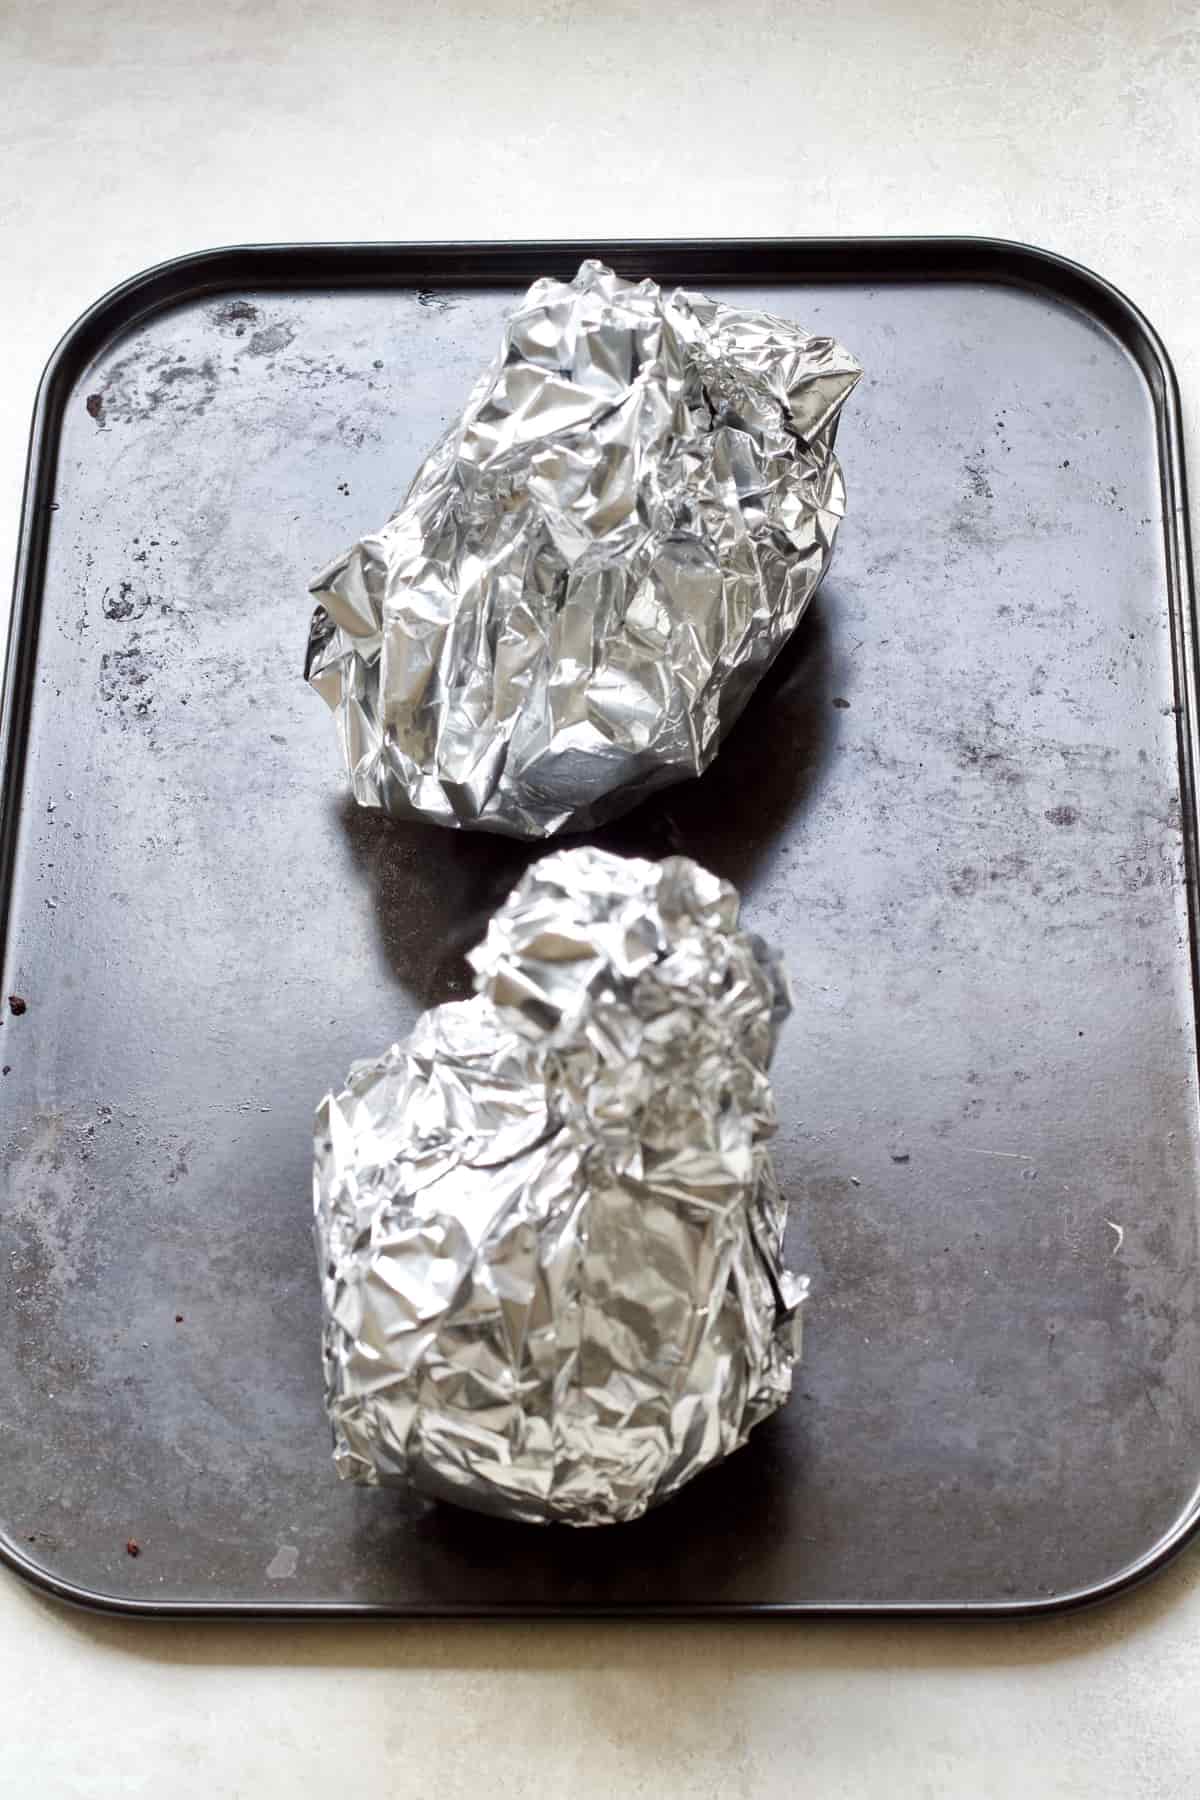 Beetroot in aluminium foil parcels on a tray.